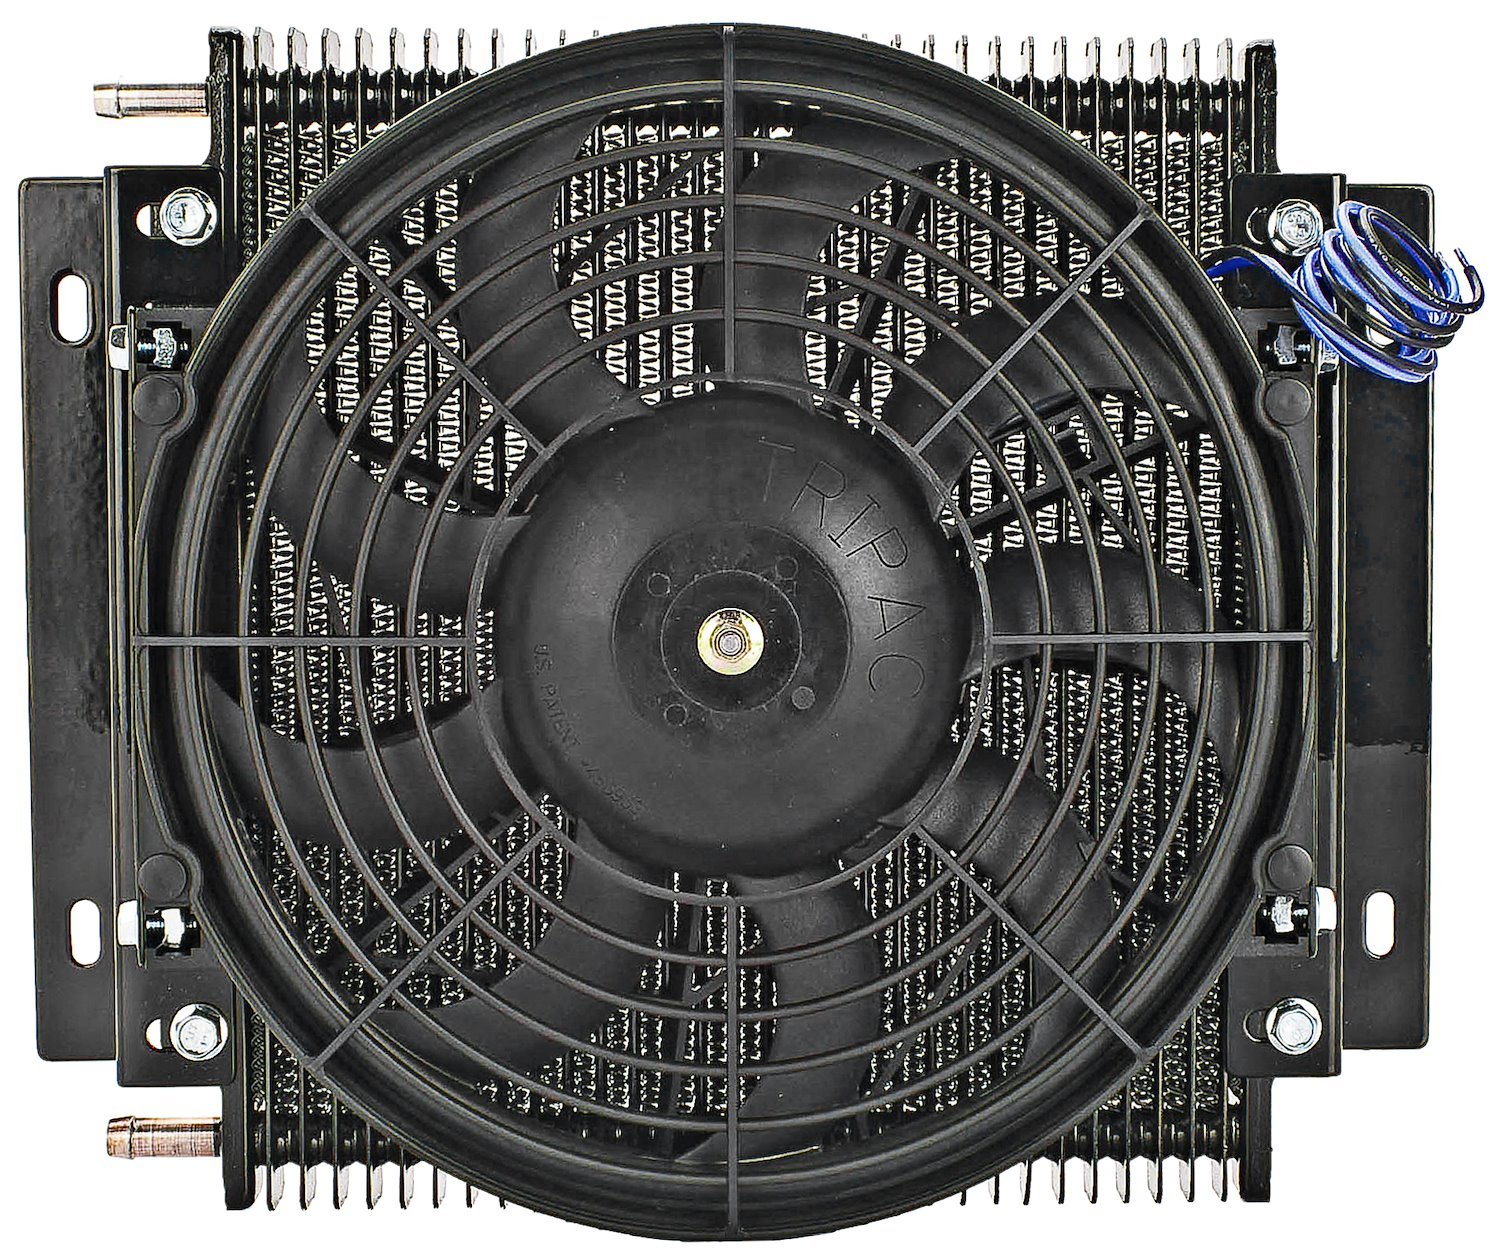 High-Performance Transmission Cooler with Fan [30,000 GVW]